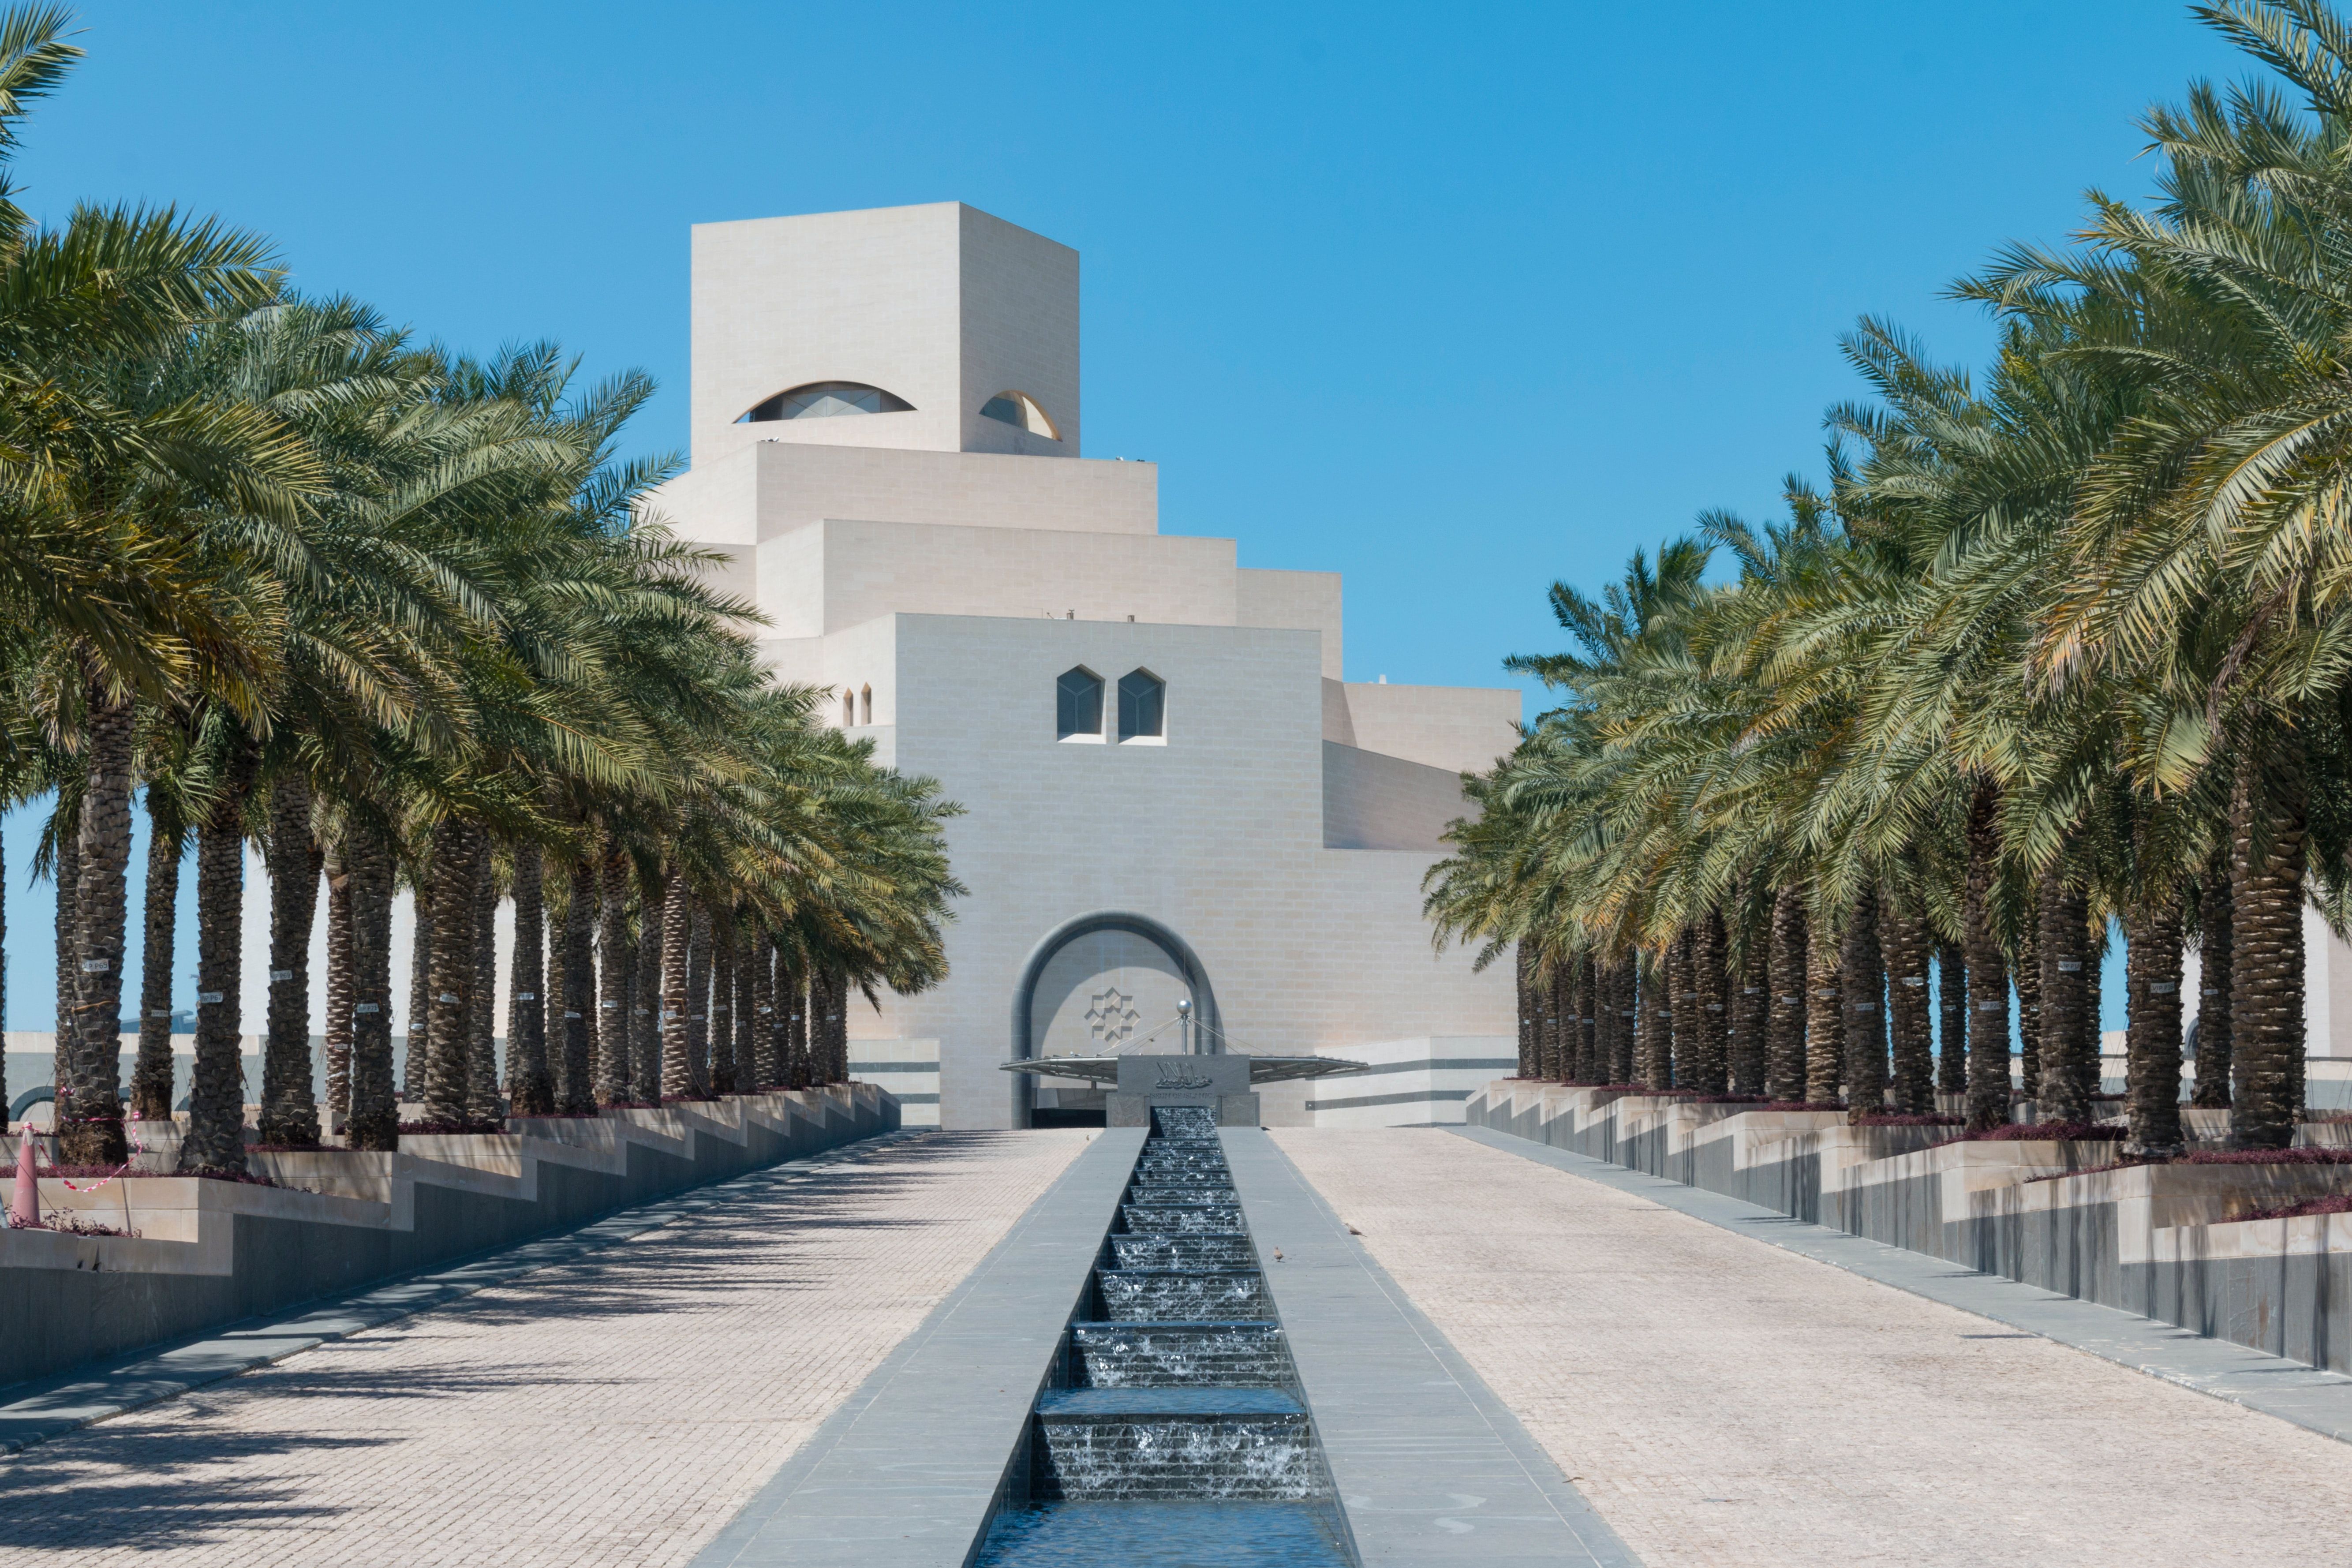 Shallow water feature lined with palm trees leading to the Museum of Islamic Art in Doha, designed by architect I.M. Pei.